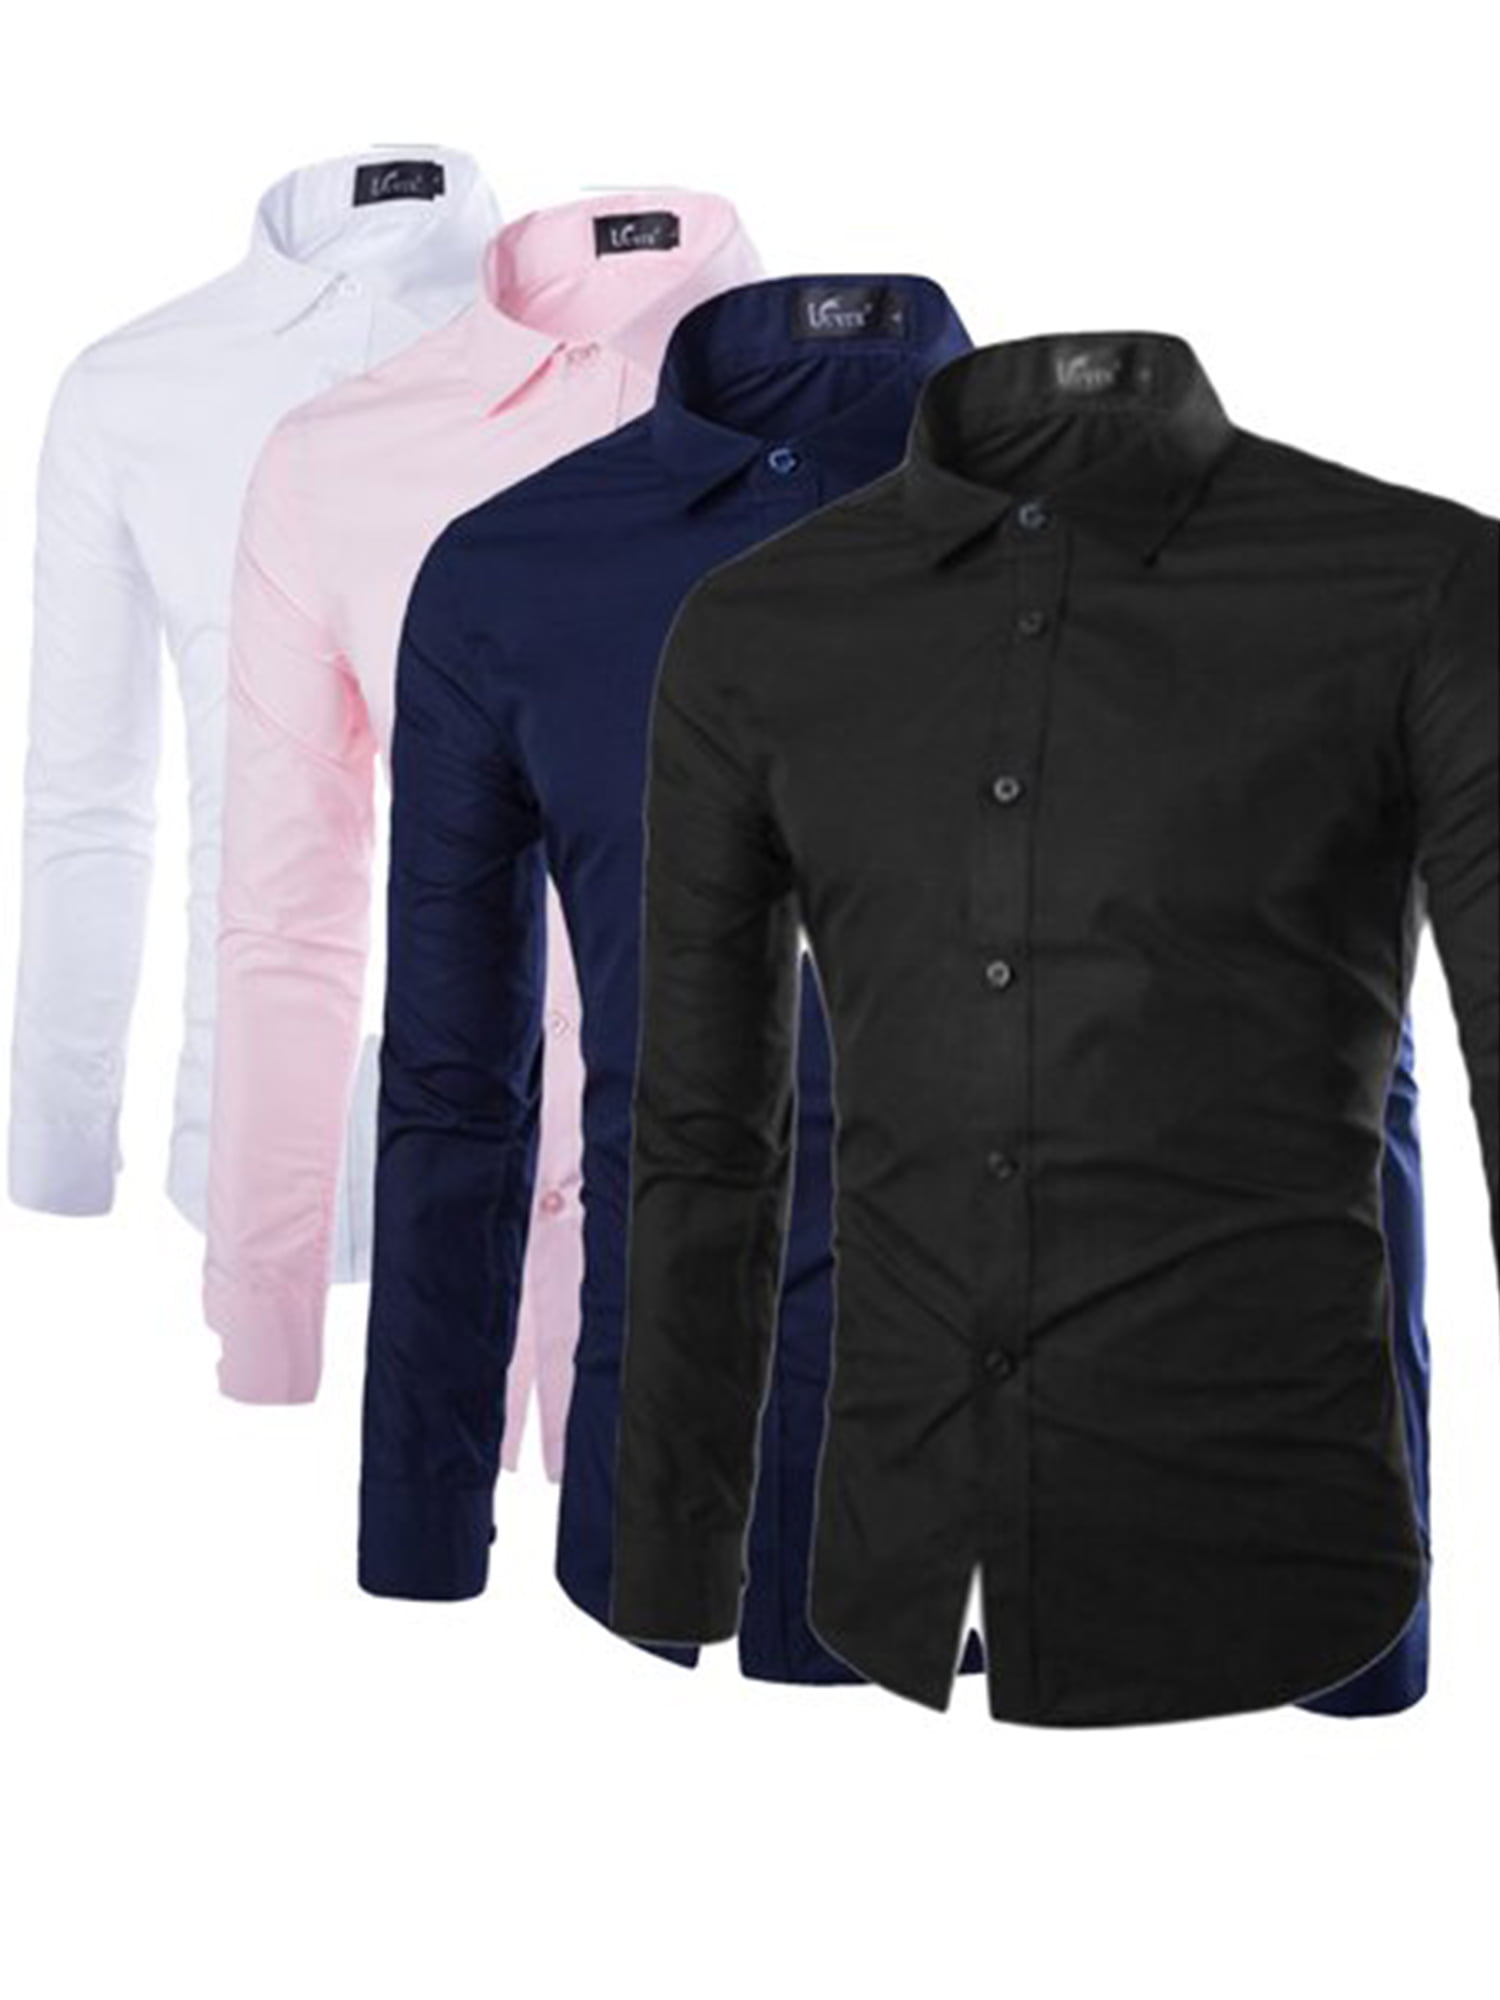 xkwyshop Men's Long Sleeve Button Up Shirts Solid Slim Fit Casual Business  Formal Dress Shirt Pink XL